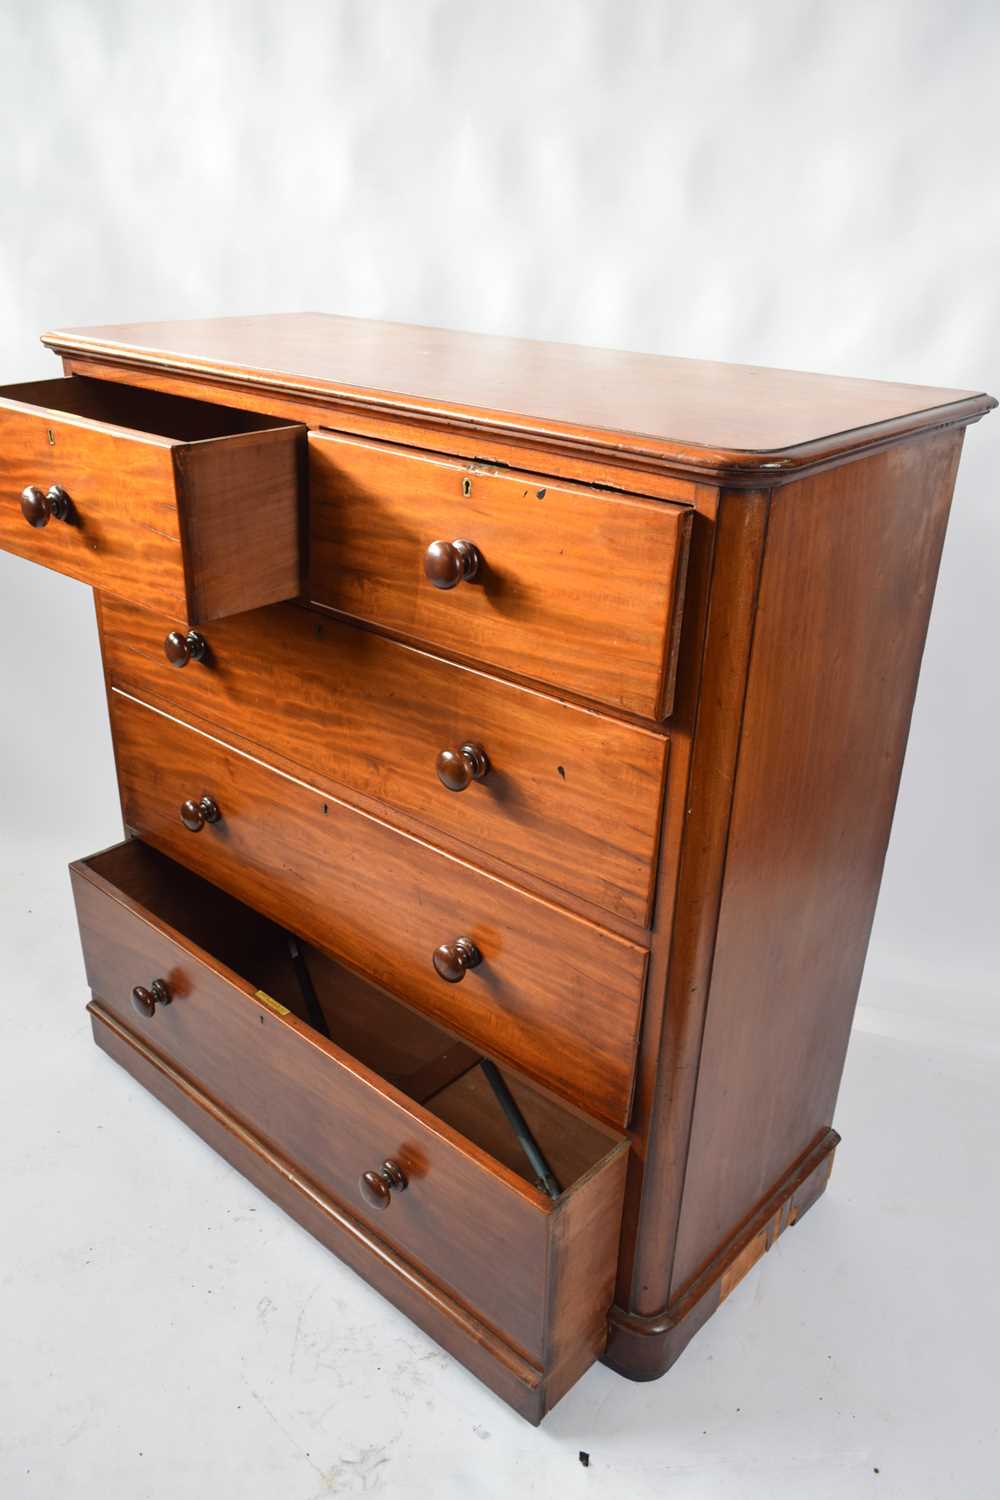 Victorian mahogany chest of two short over three longs drawers with turned knob handles